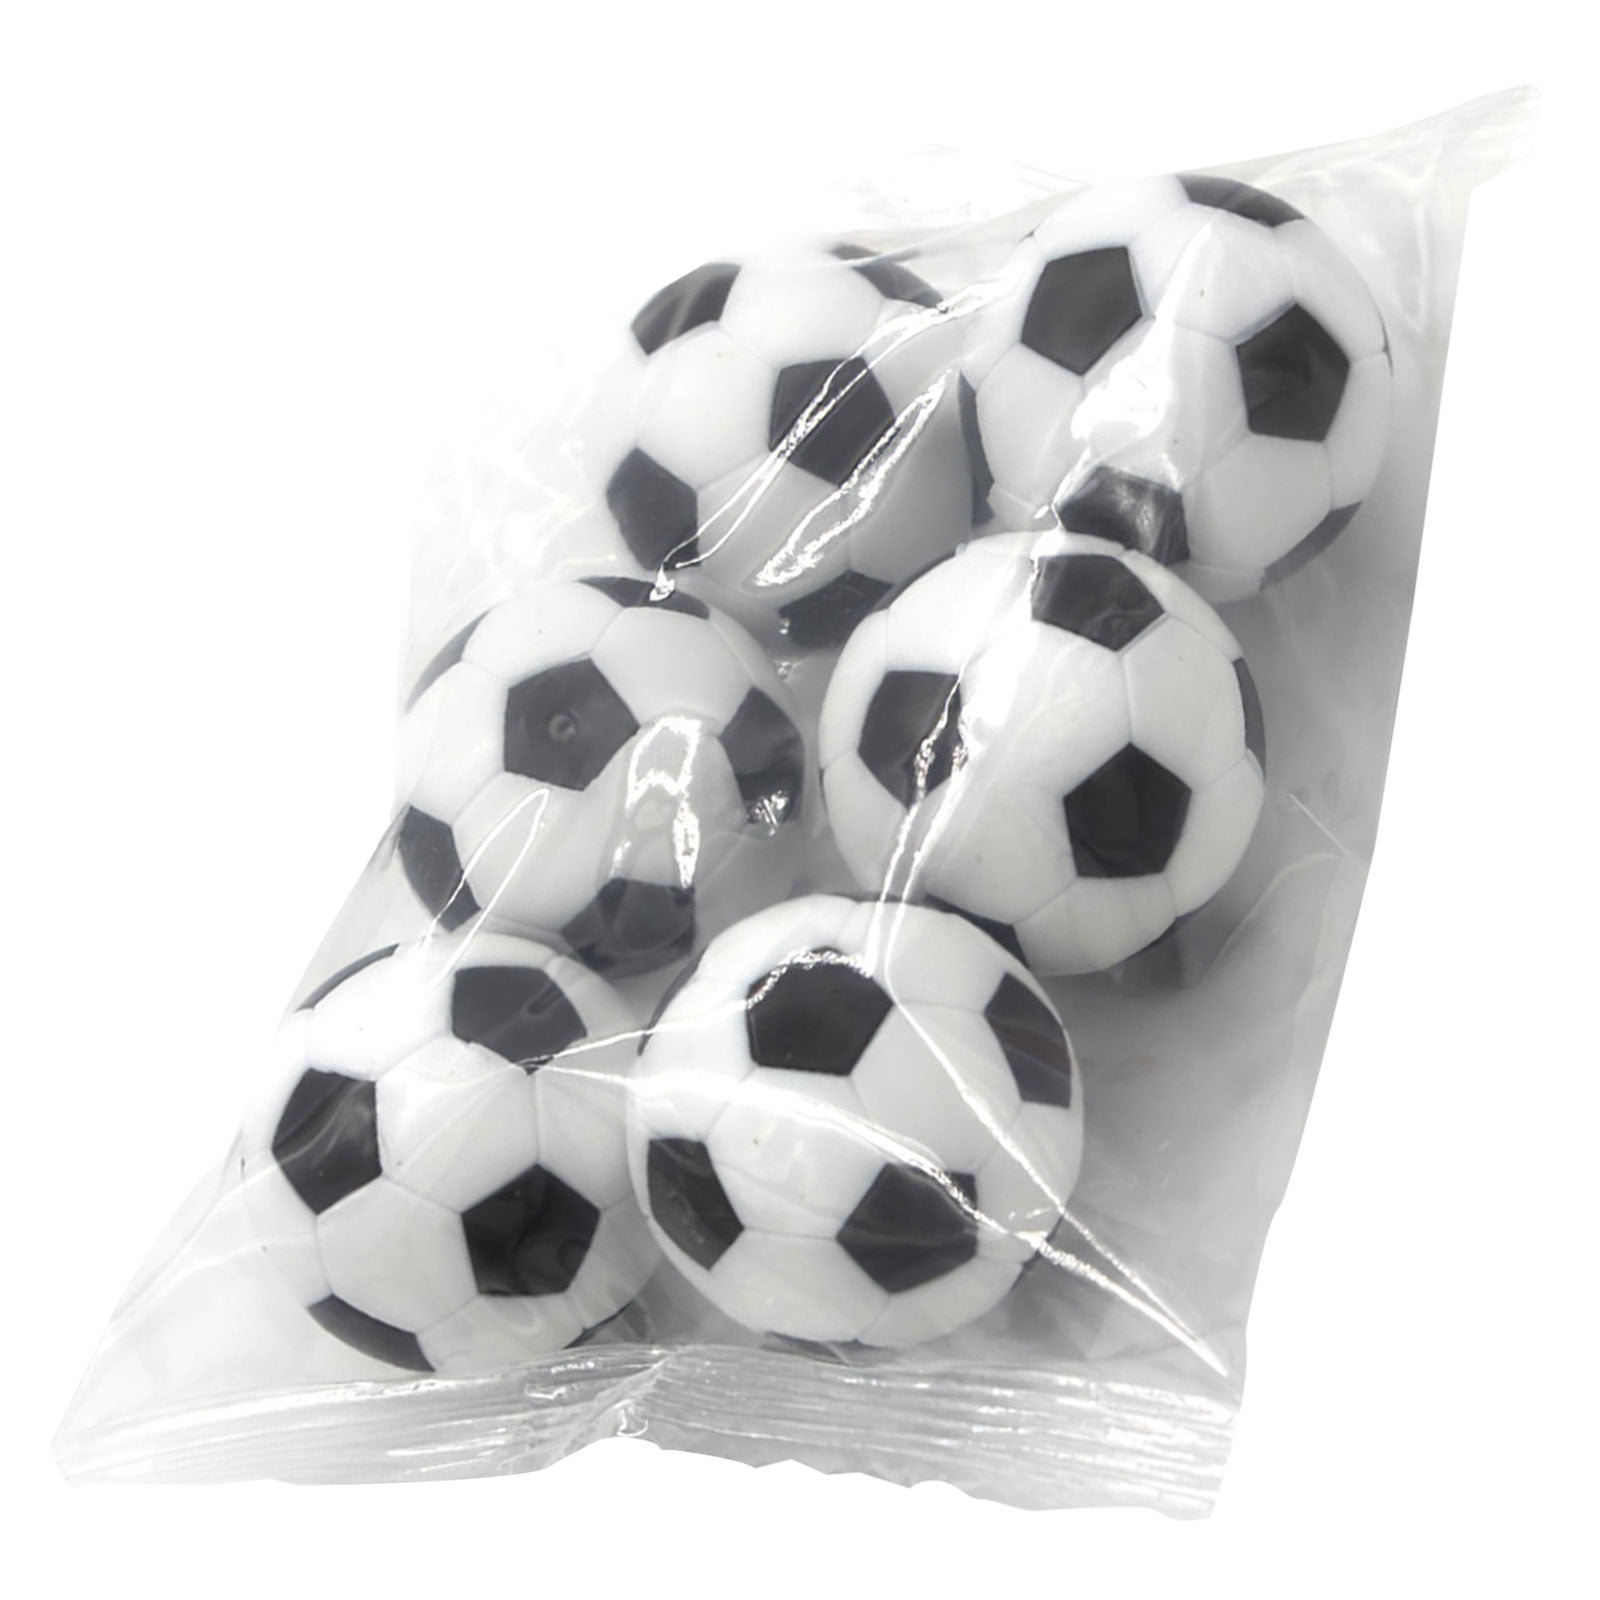 TGA Sports Table Soccer Foosballs Replacements Mini Black and White Soccer Balls Set of 12